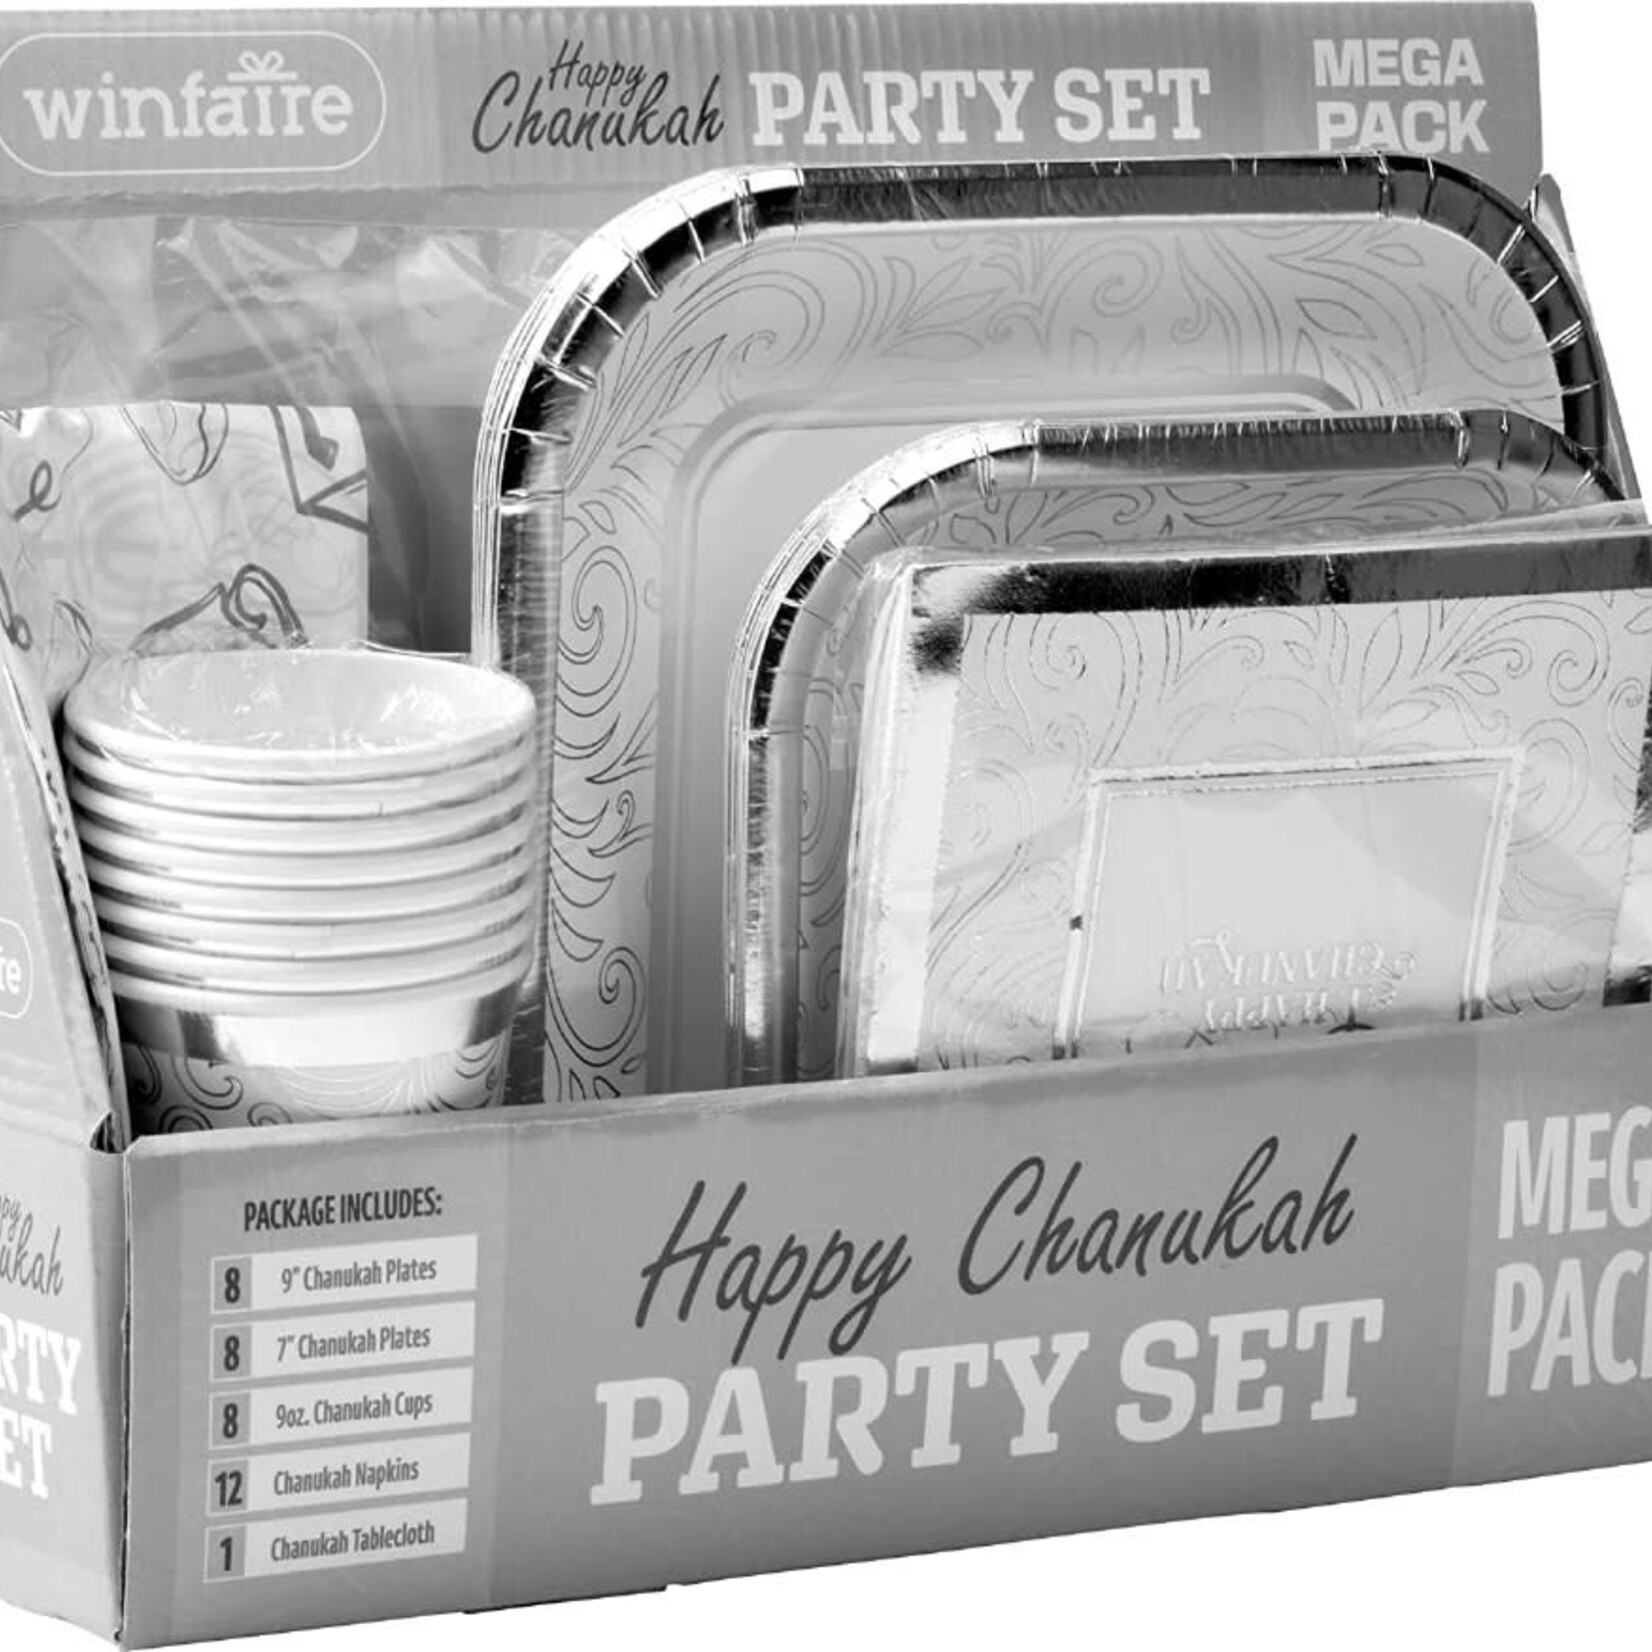 Chanukah Party Set Mega Pack Service for 8 - Silver Design (Cutlery Not Included)